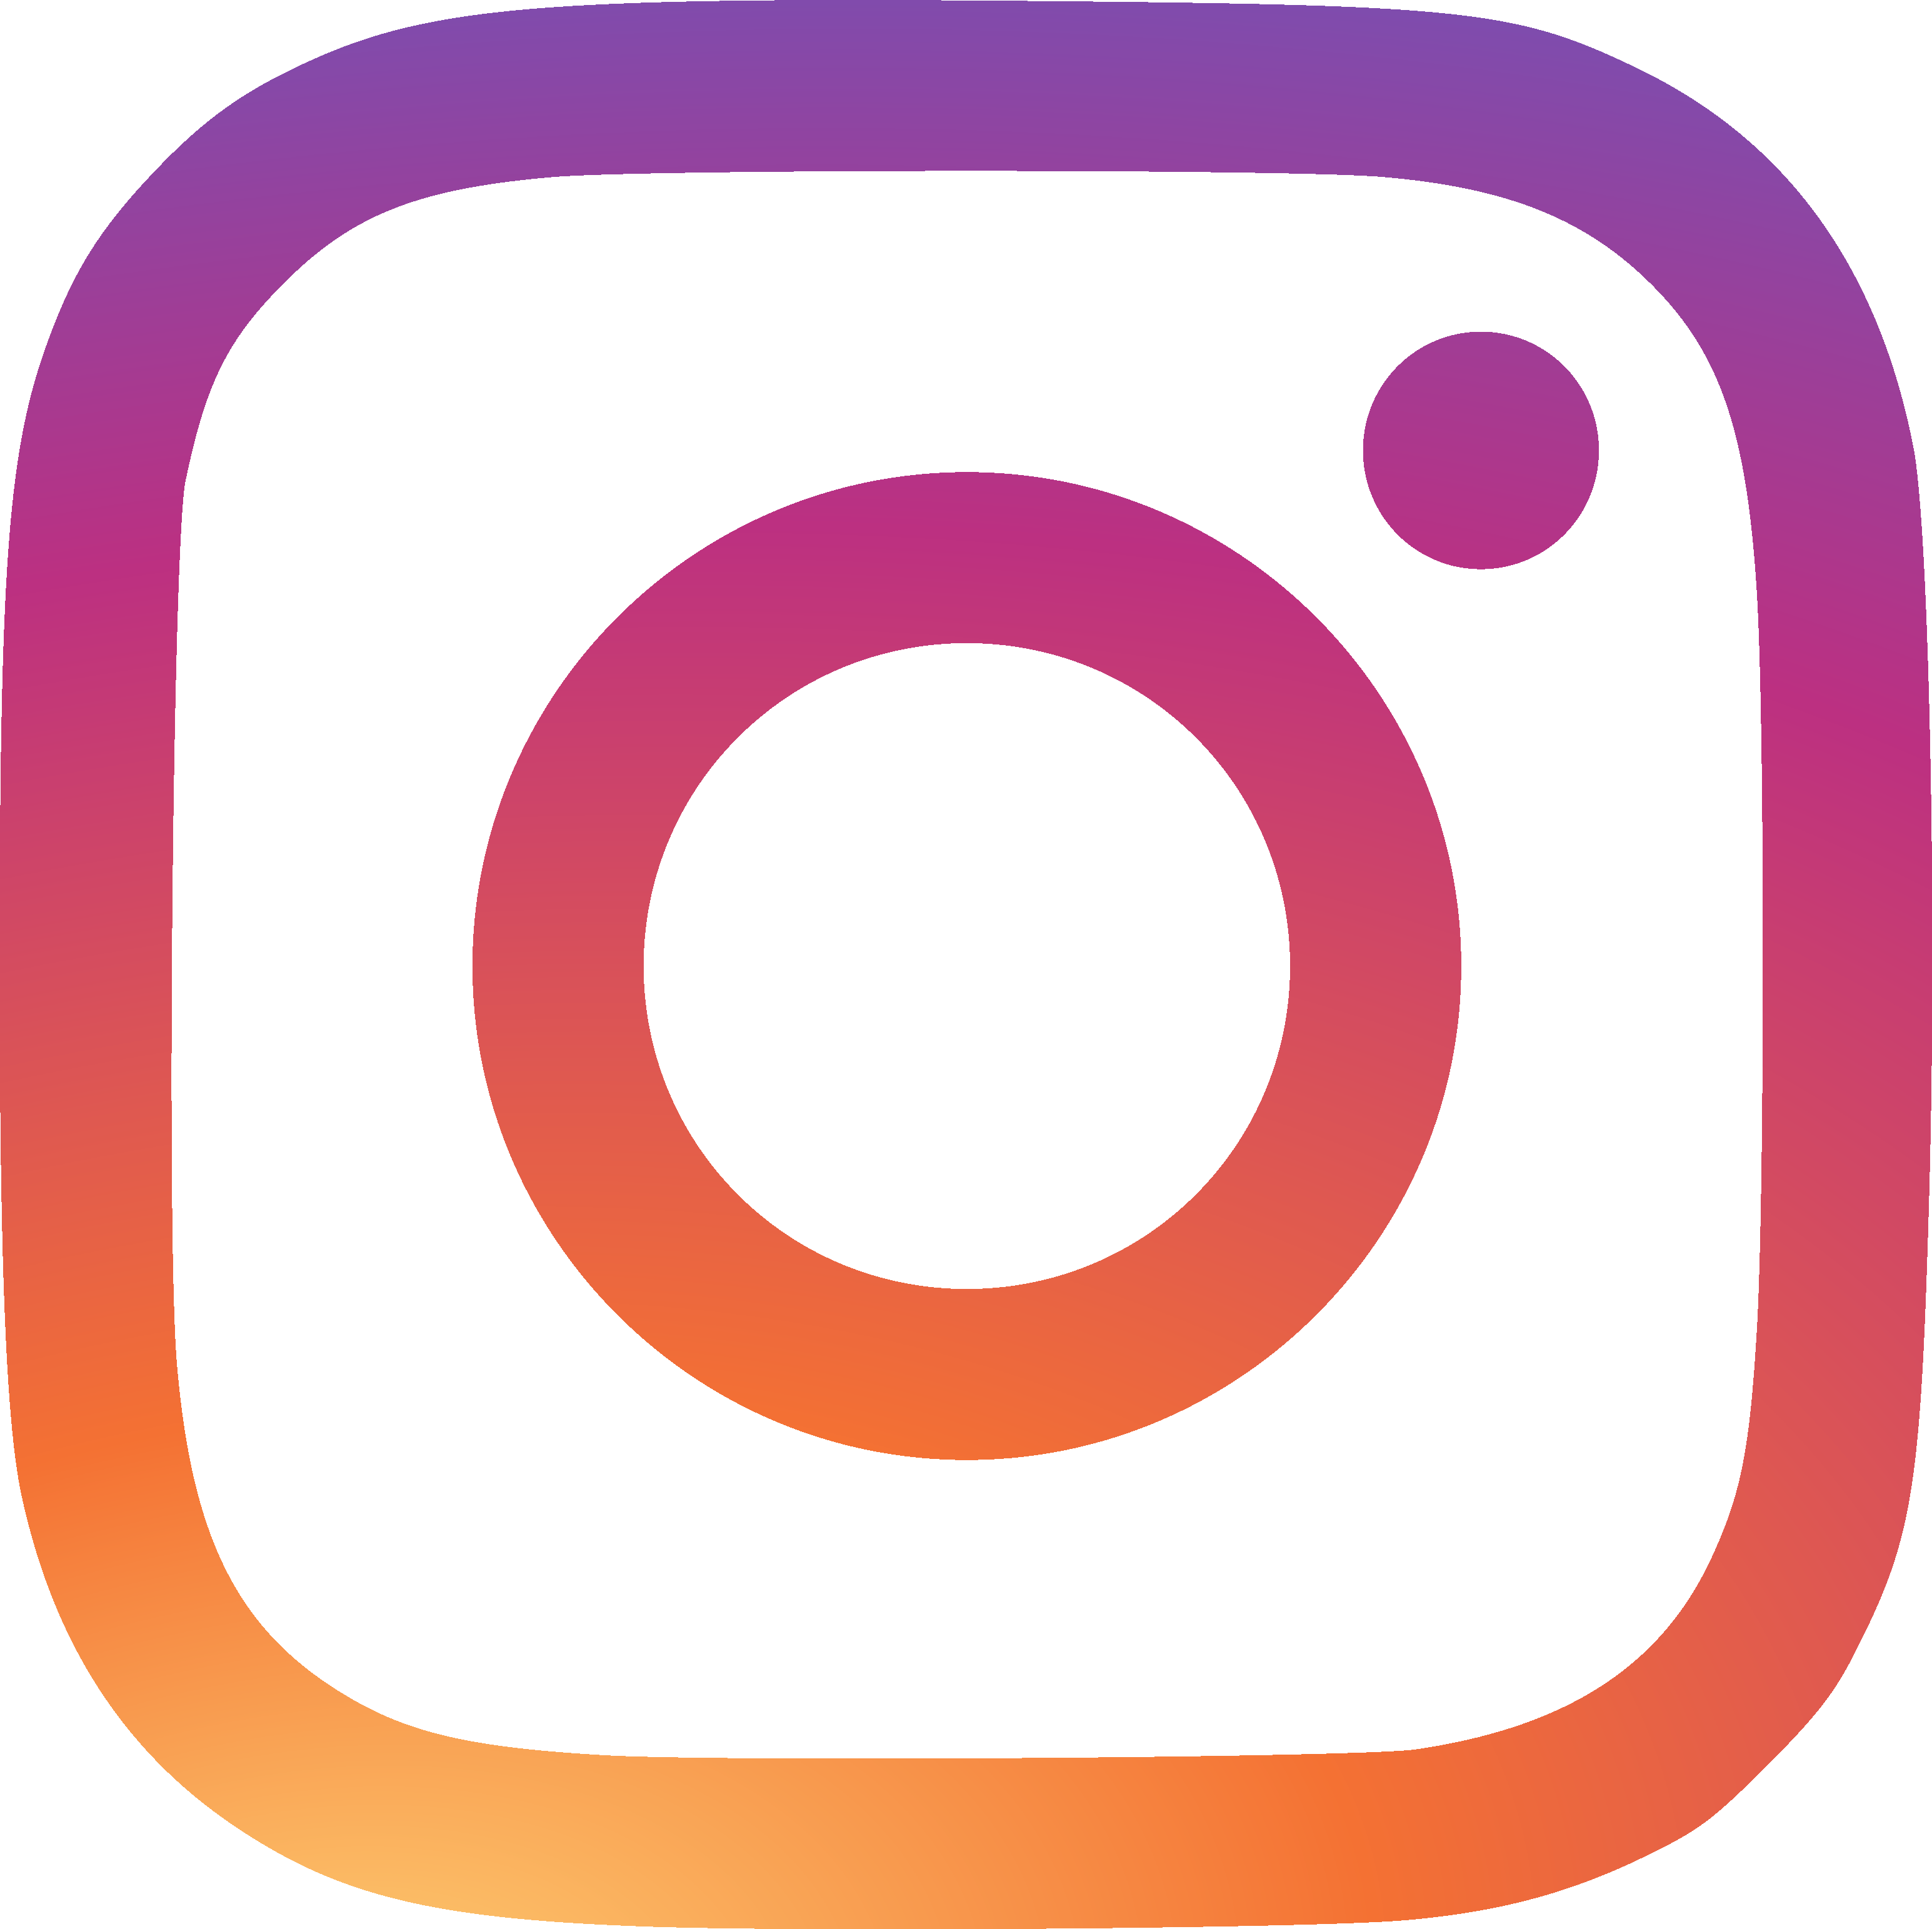 Instagram Logo Png Icon : Free icons of instagram in various ui design